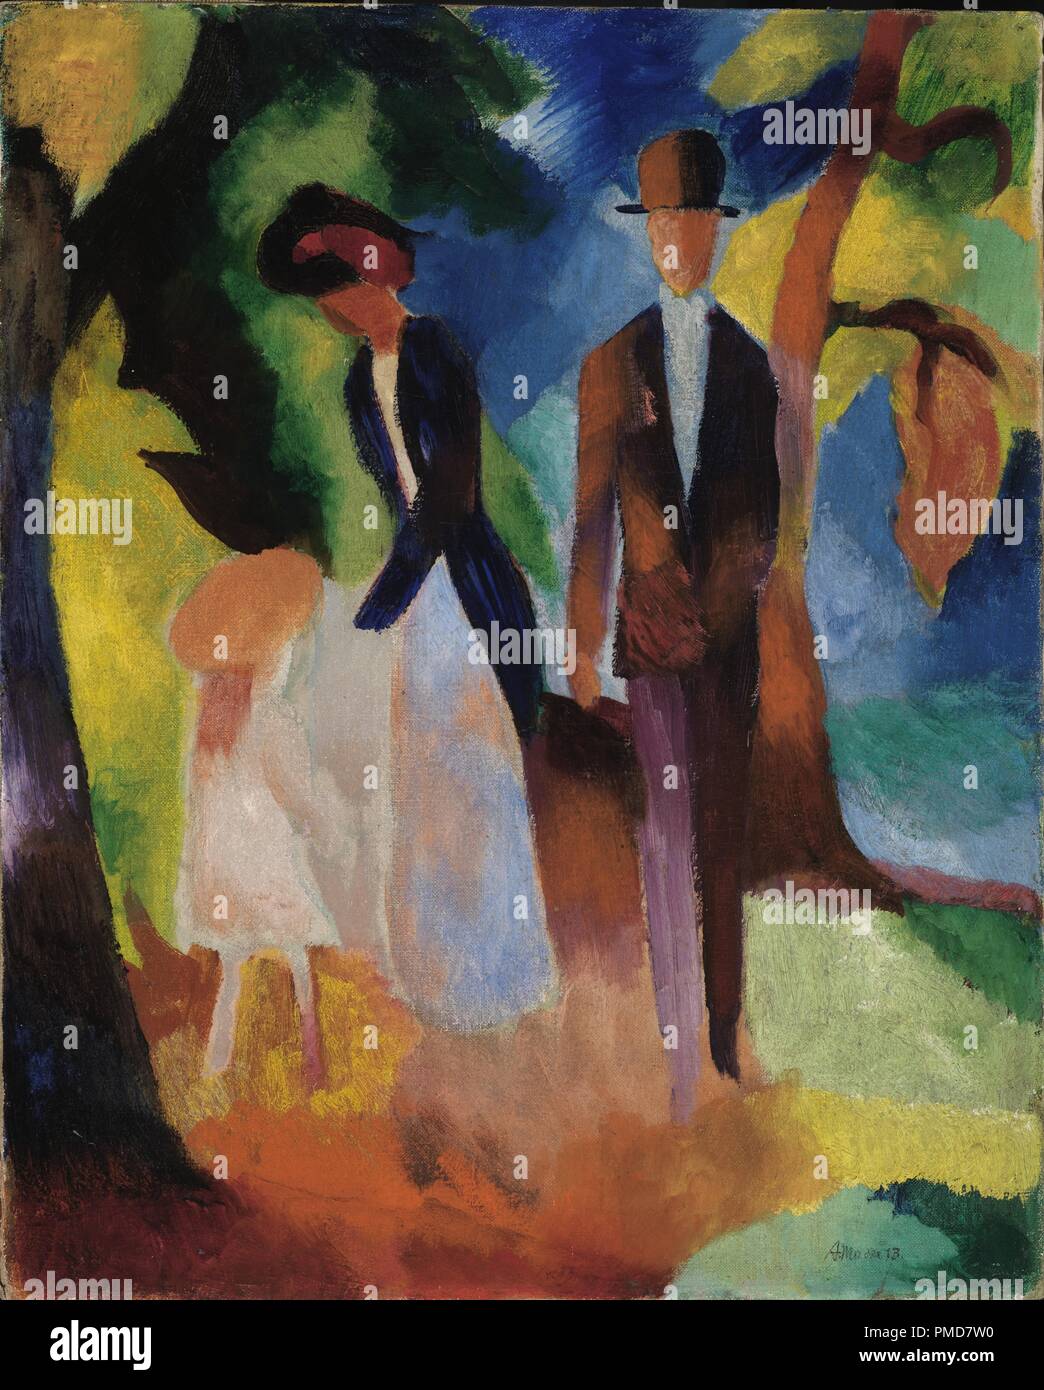 Leute am blauen See. Date/Period: 1913. Painting. Oil on canvas. Height: 60 cm (23.6 in); Width: 48.5 cm (19 in). Author: August Macke. Stock Photo